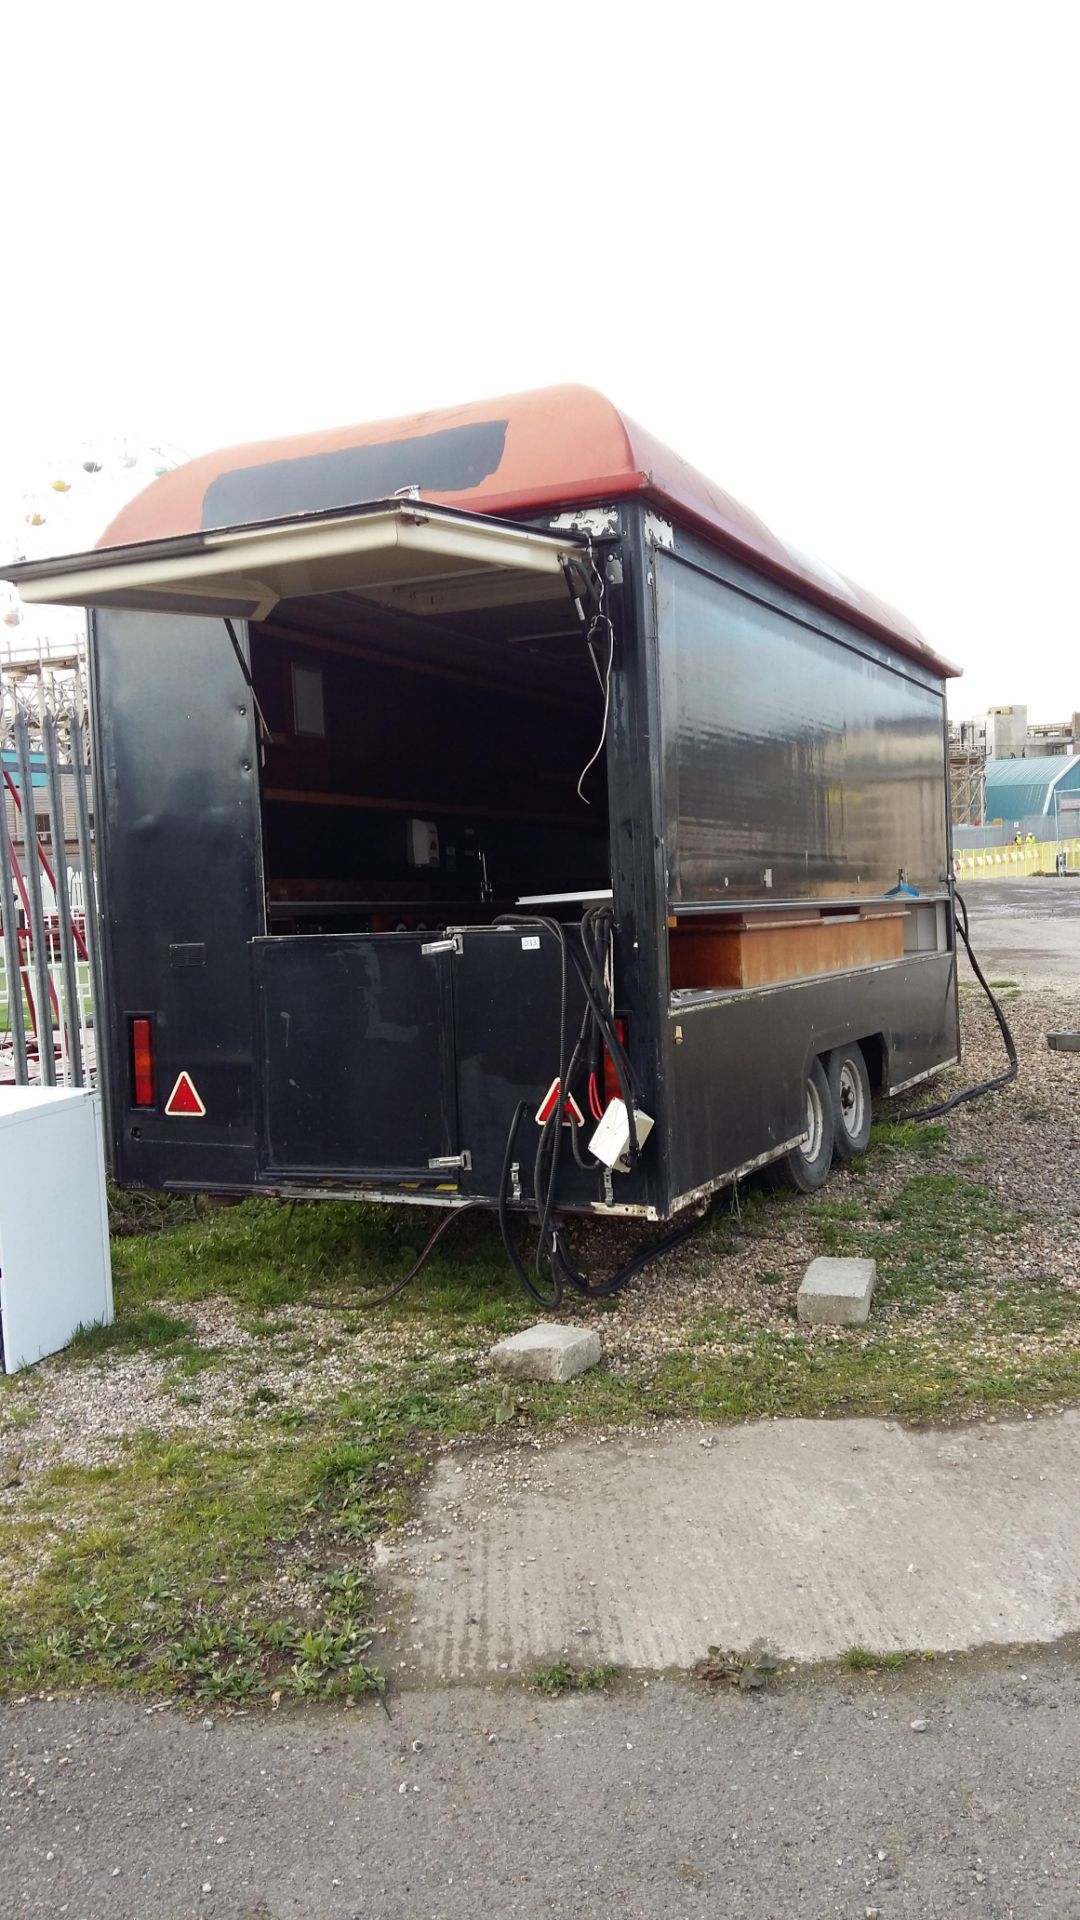 Mobile catering trailer - Image 3 of 7